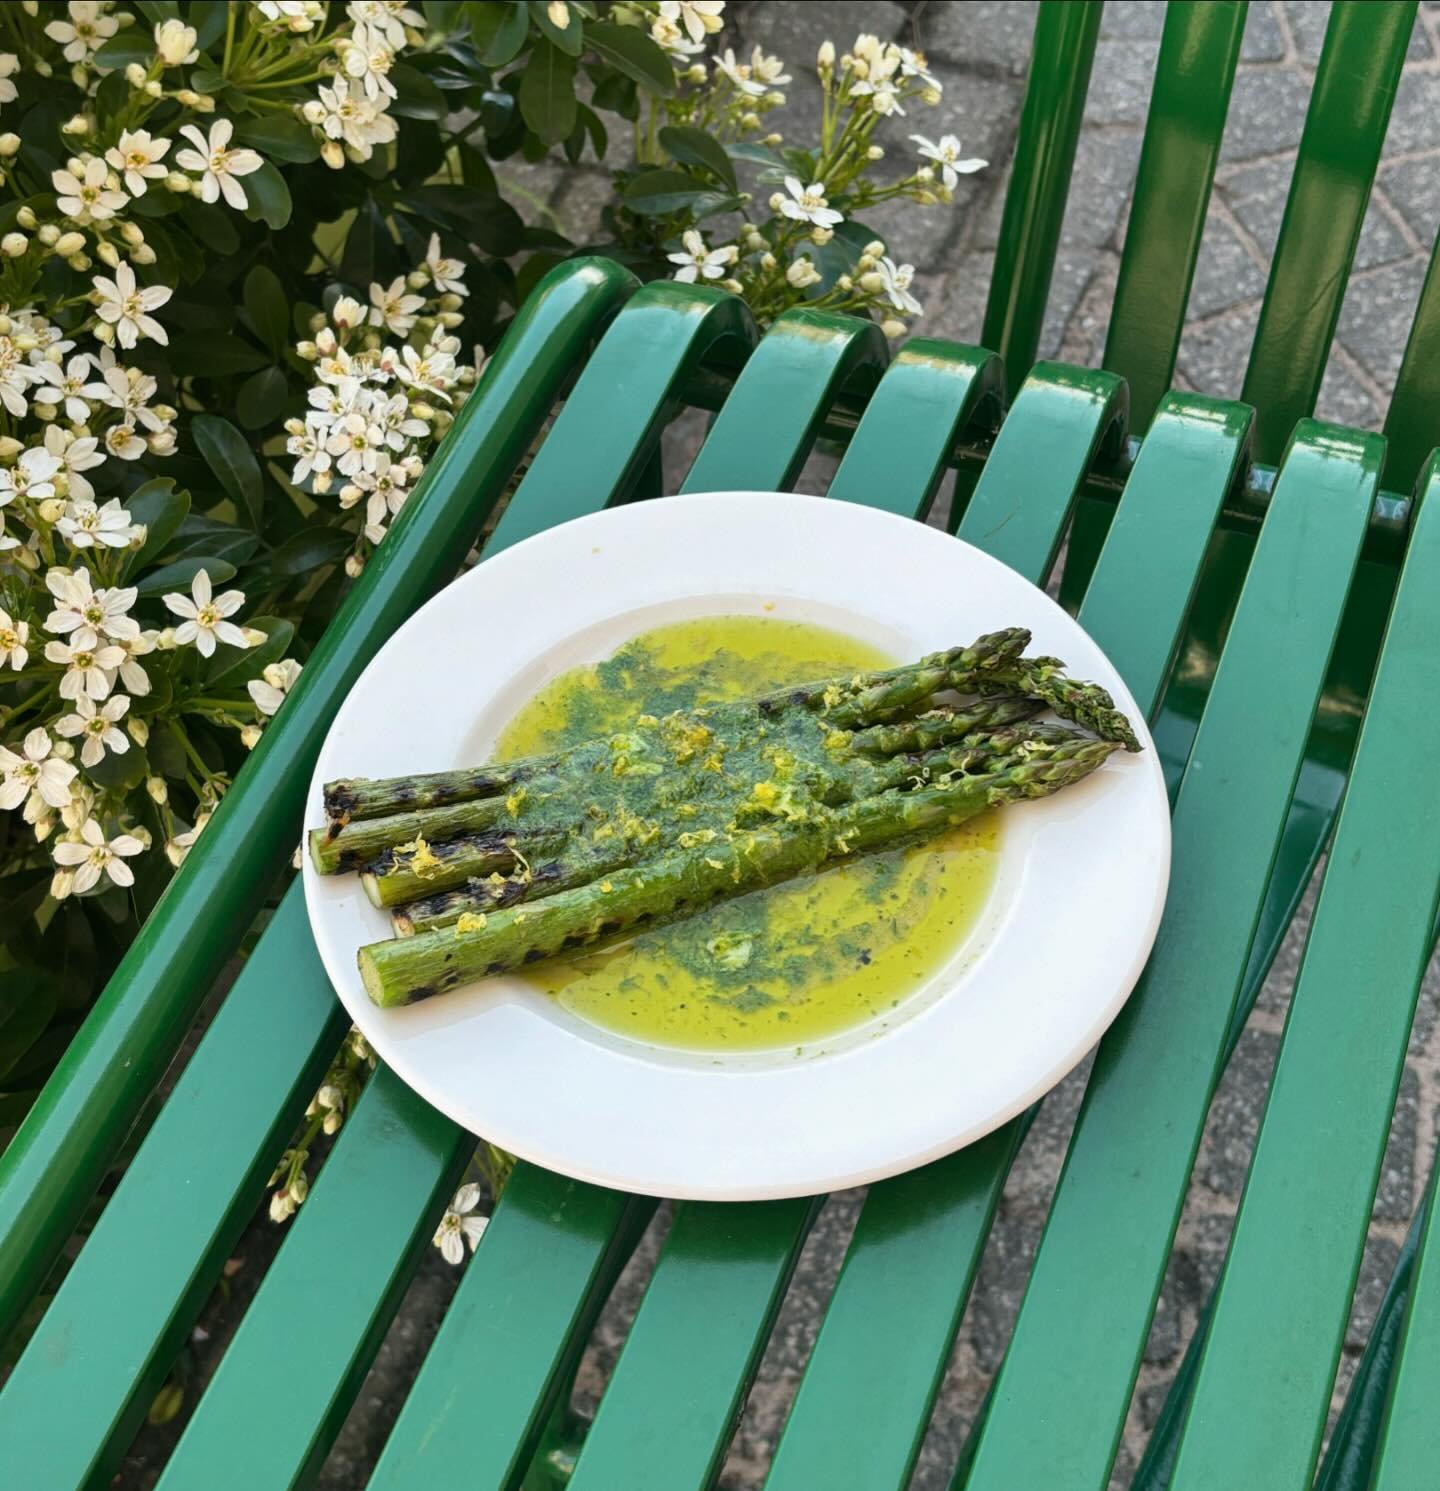 ⠀⠀⠀⠀⠀⠀⠀⠀⠀ ⠀⠀⠀⠀⠀⠀⠀⠀⠀ 
Green Griddled Asparagus,
 ⠀⠀ amongst the blossoms.  Do not let
 those spears fall through the ⠀⠀⠀⠀⠀⠀⠀⠀⠀ gaps
  in the table, ⠀as you eat your lunch -
 ⠀⠀⠀⠀⠀⠀⠀⠀⠀ outside.